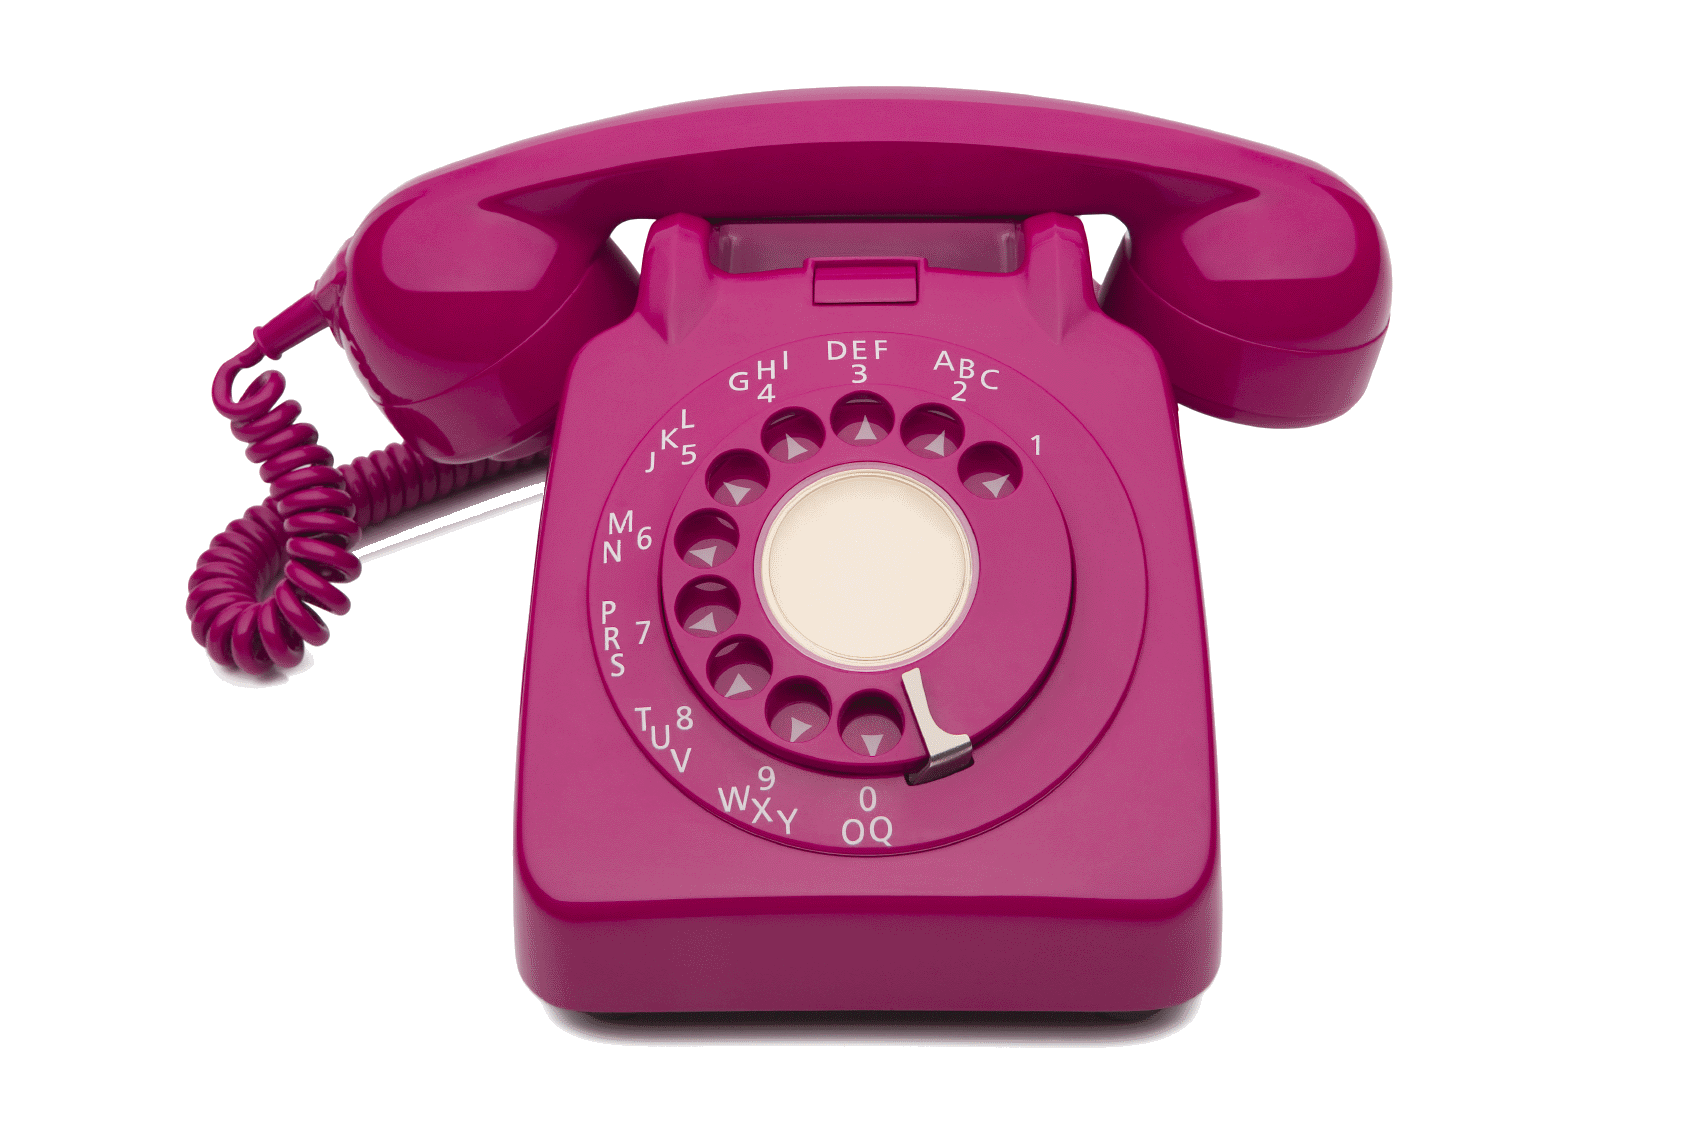 Telephone - Telephone Image, Transparent background PNG HD thumbnail